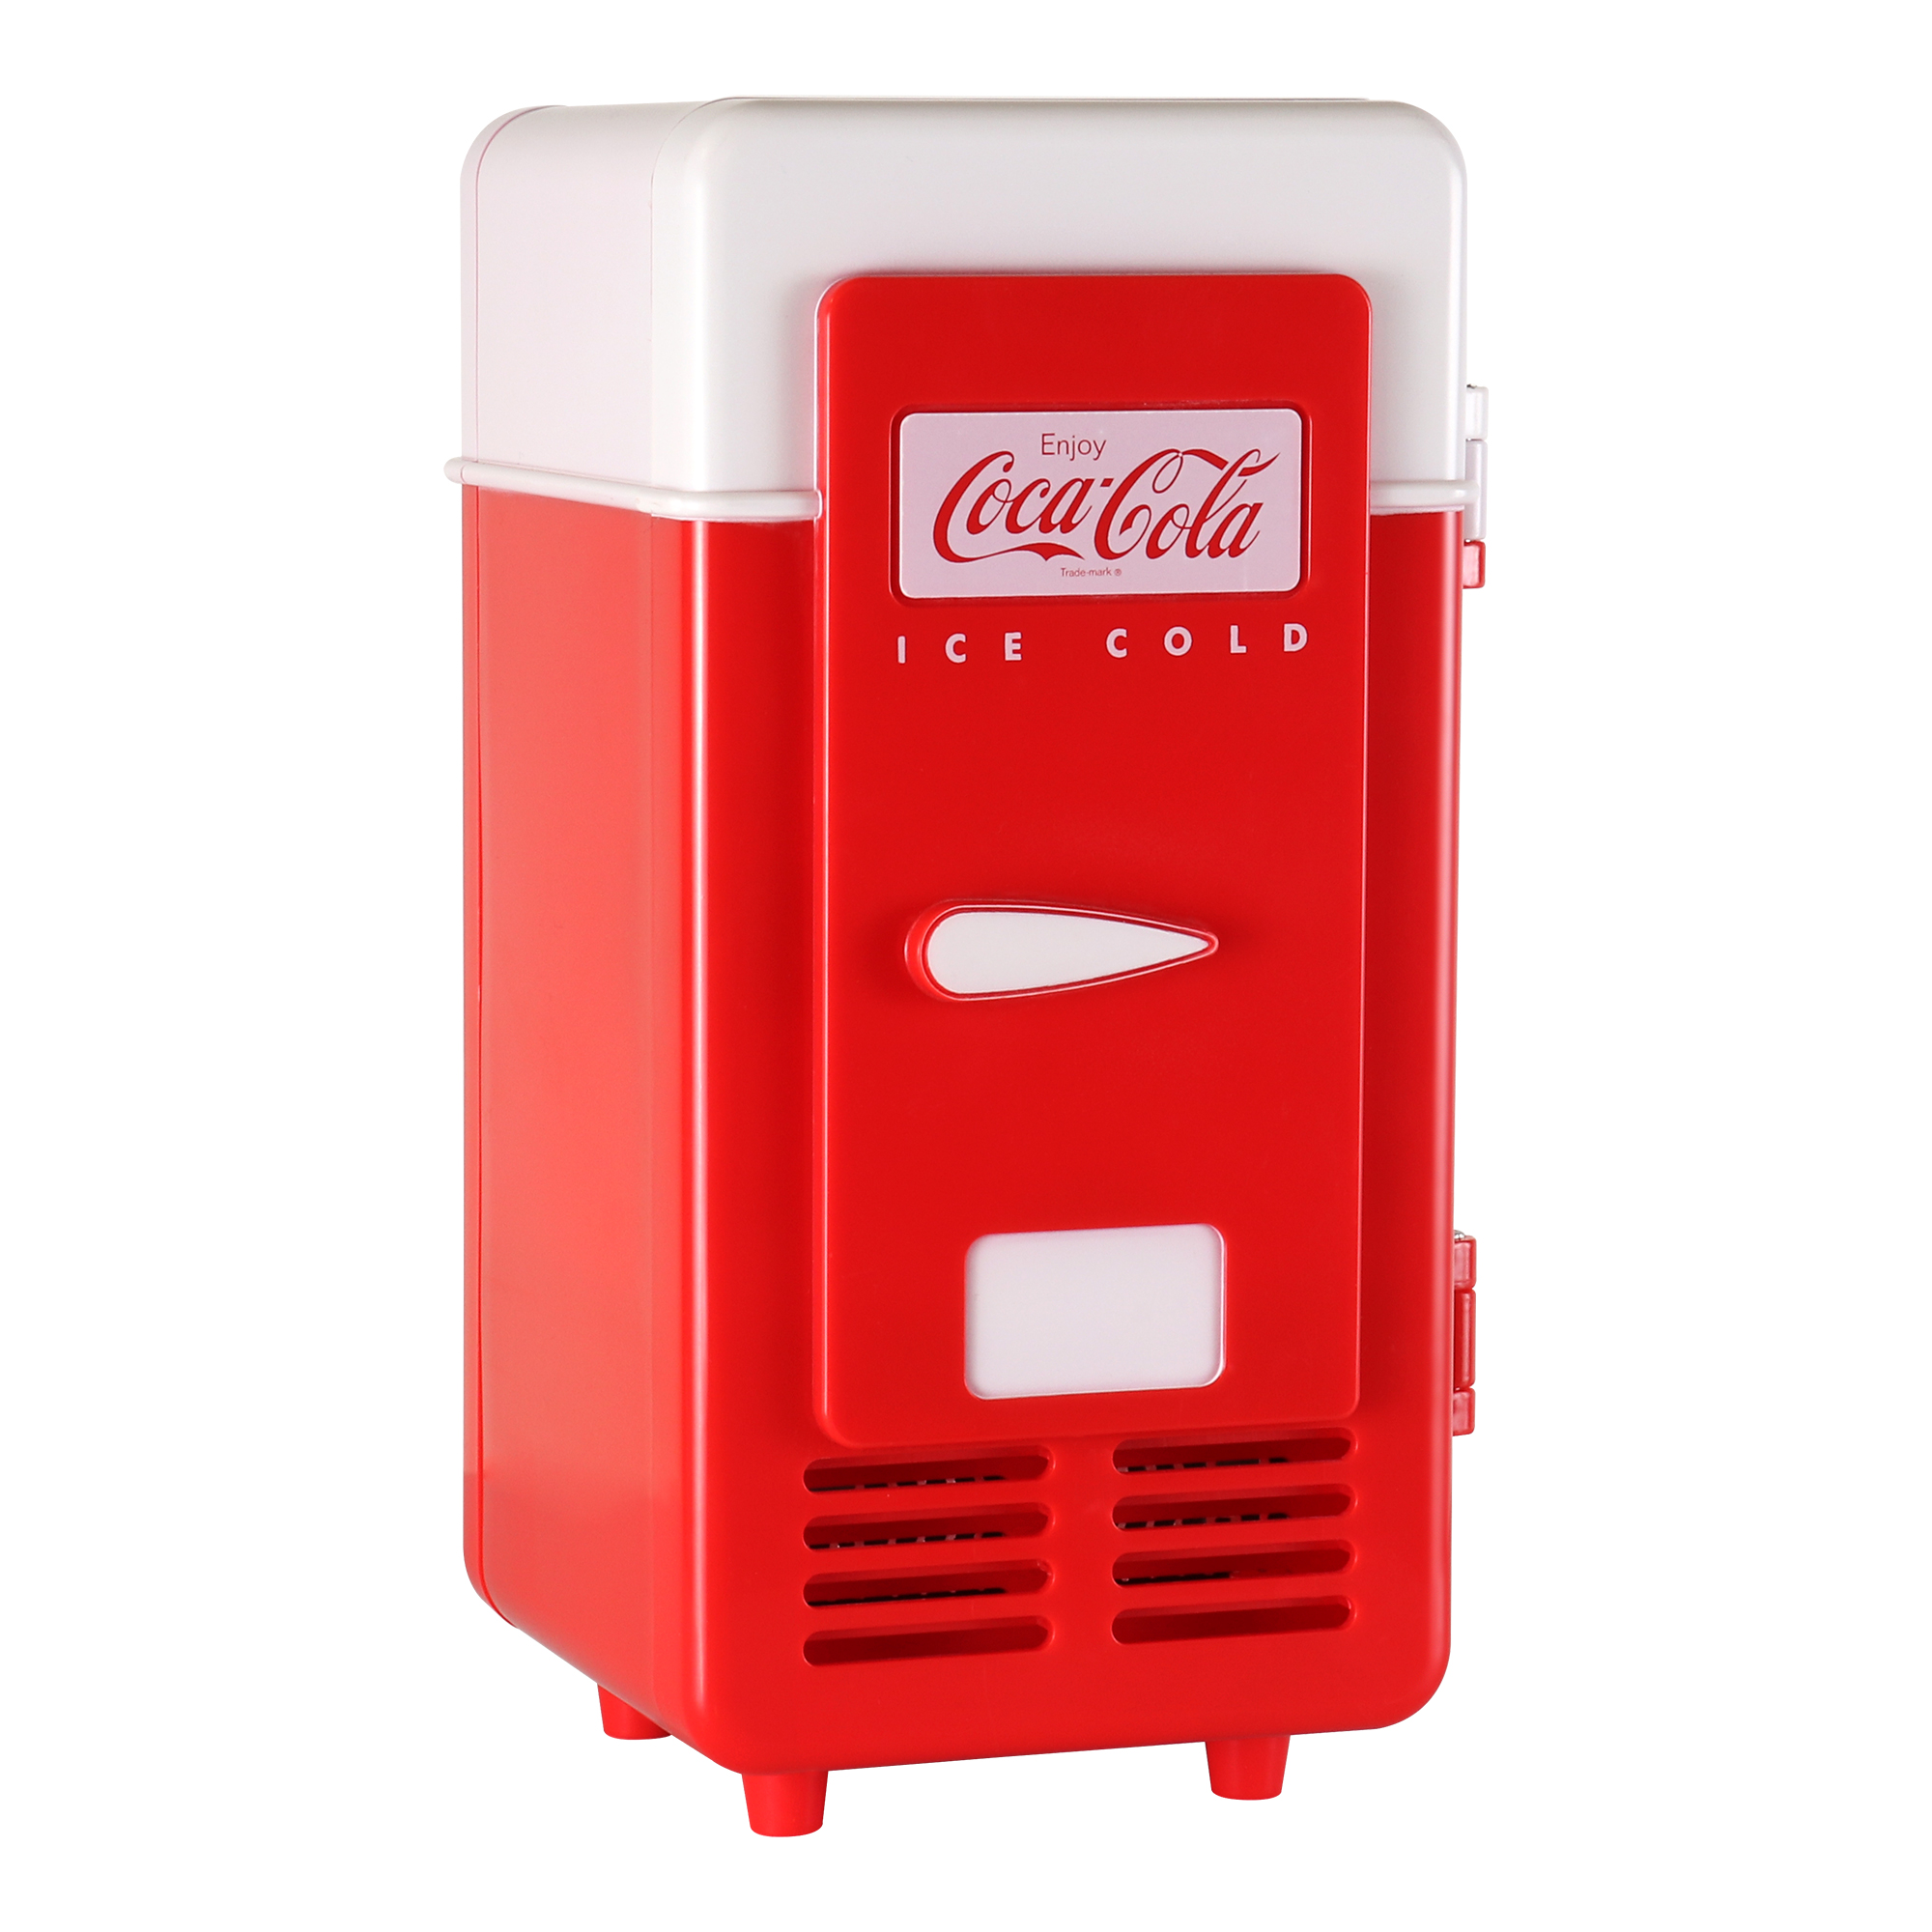 Coca-Cola Single Can Cooler, Red, USB Powered Retro One Can Mini Fridge, Thermoelectric Cooler for Desk, Home, Office, Dorm, Unique Gift for Students or Office Workers - image 5 of 5